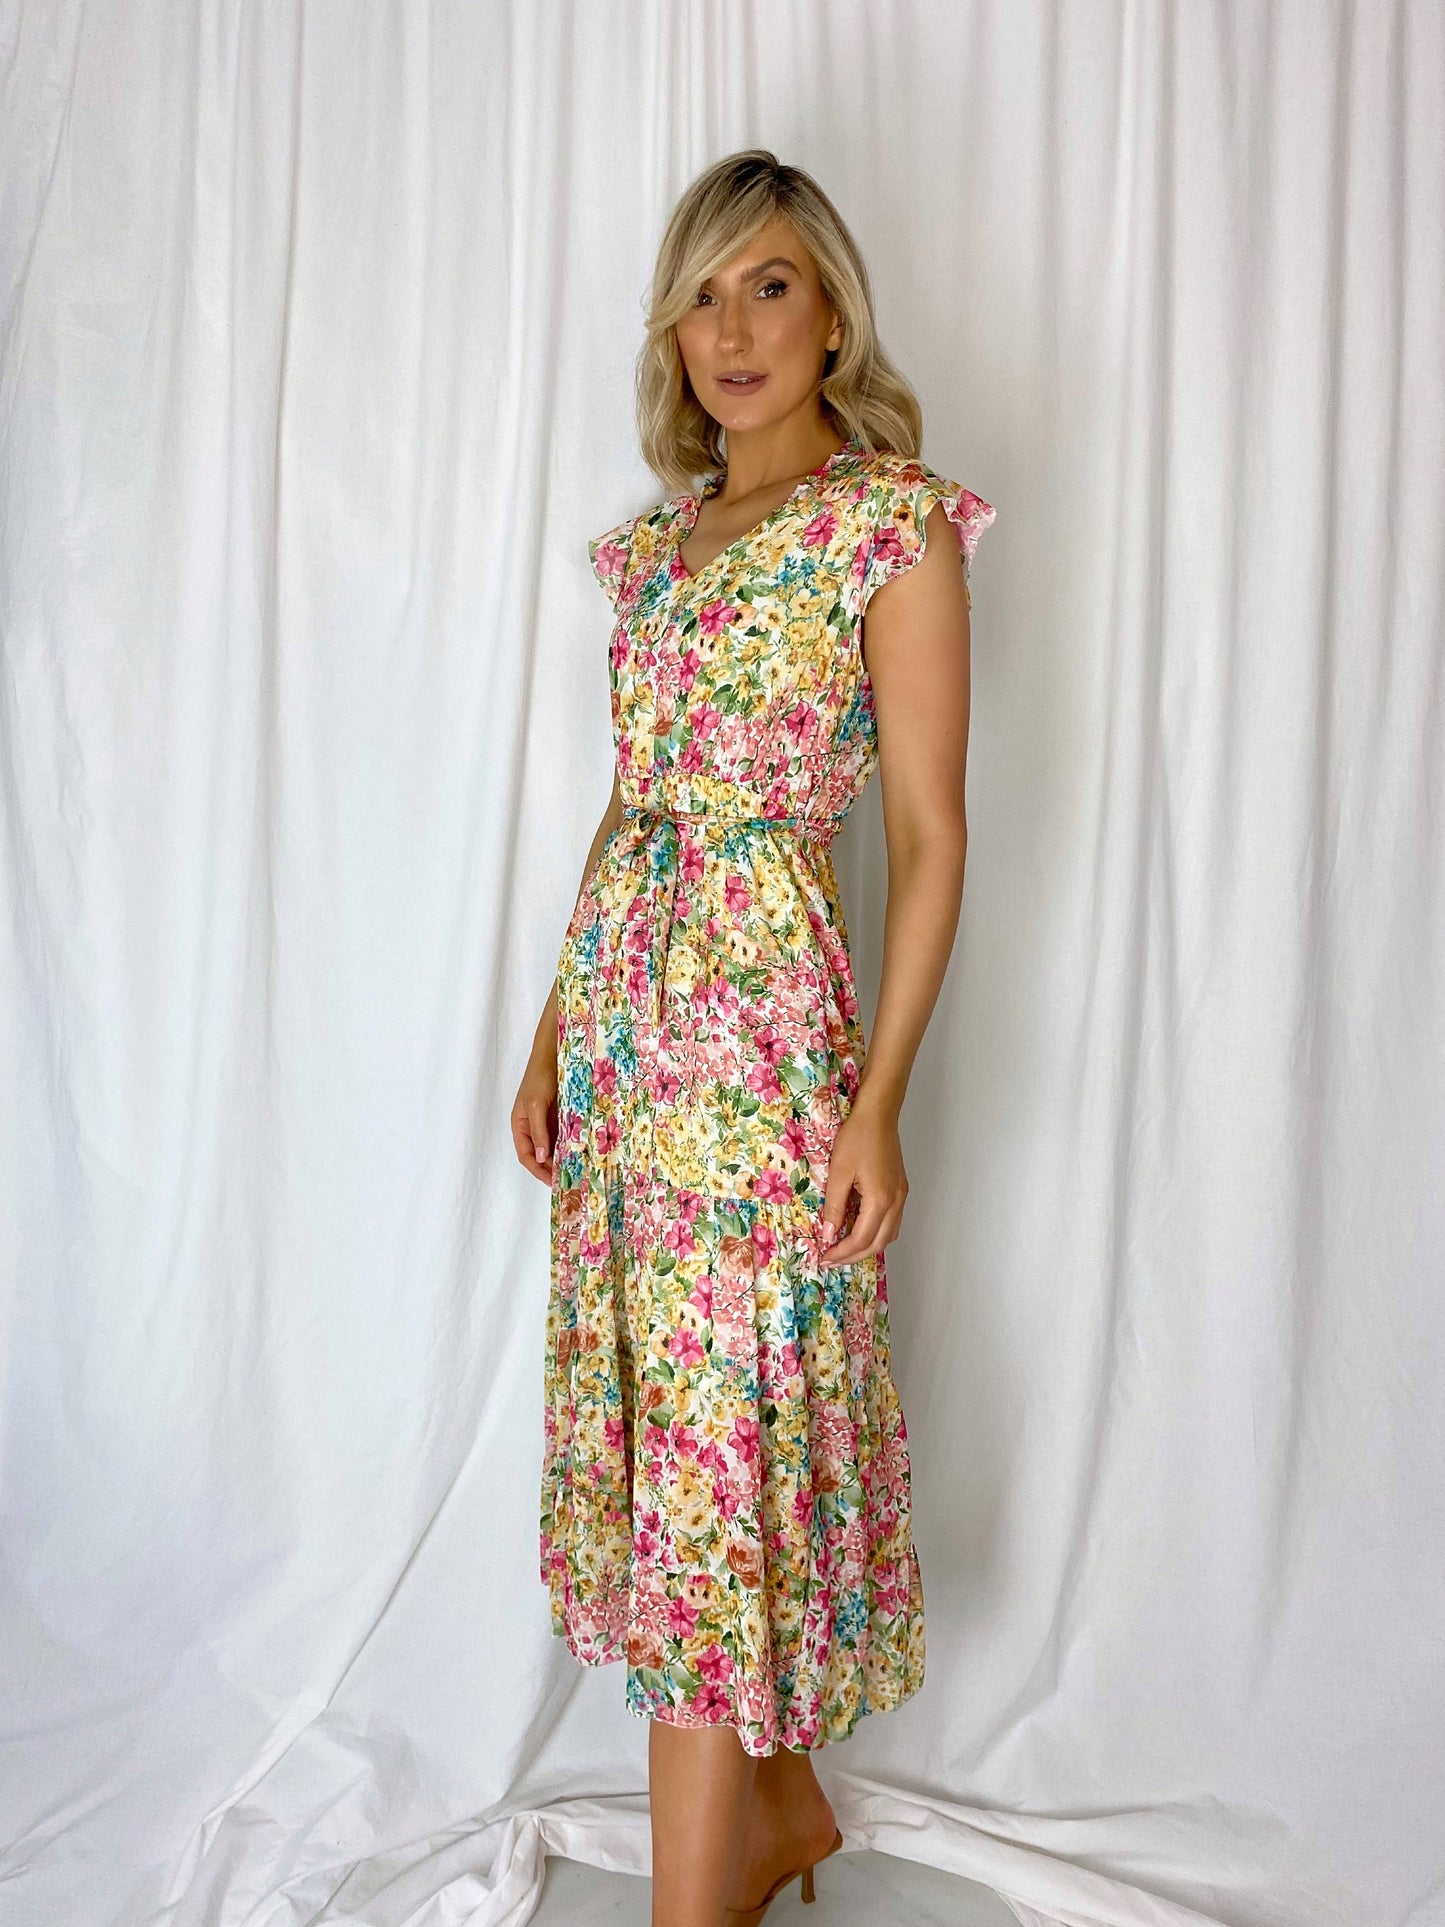 Nadine Pink and Yellow Floral Dress